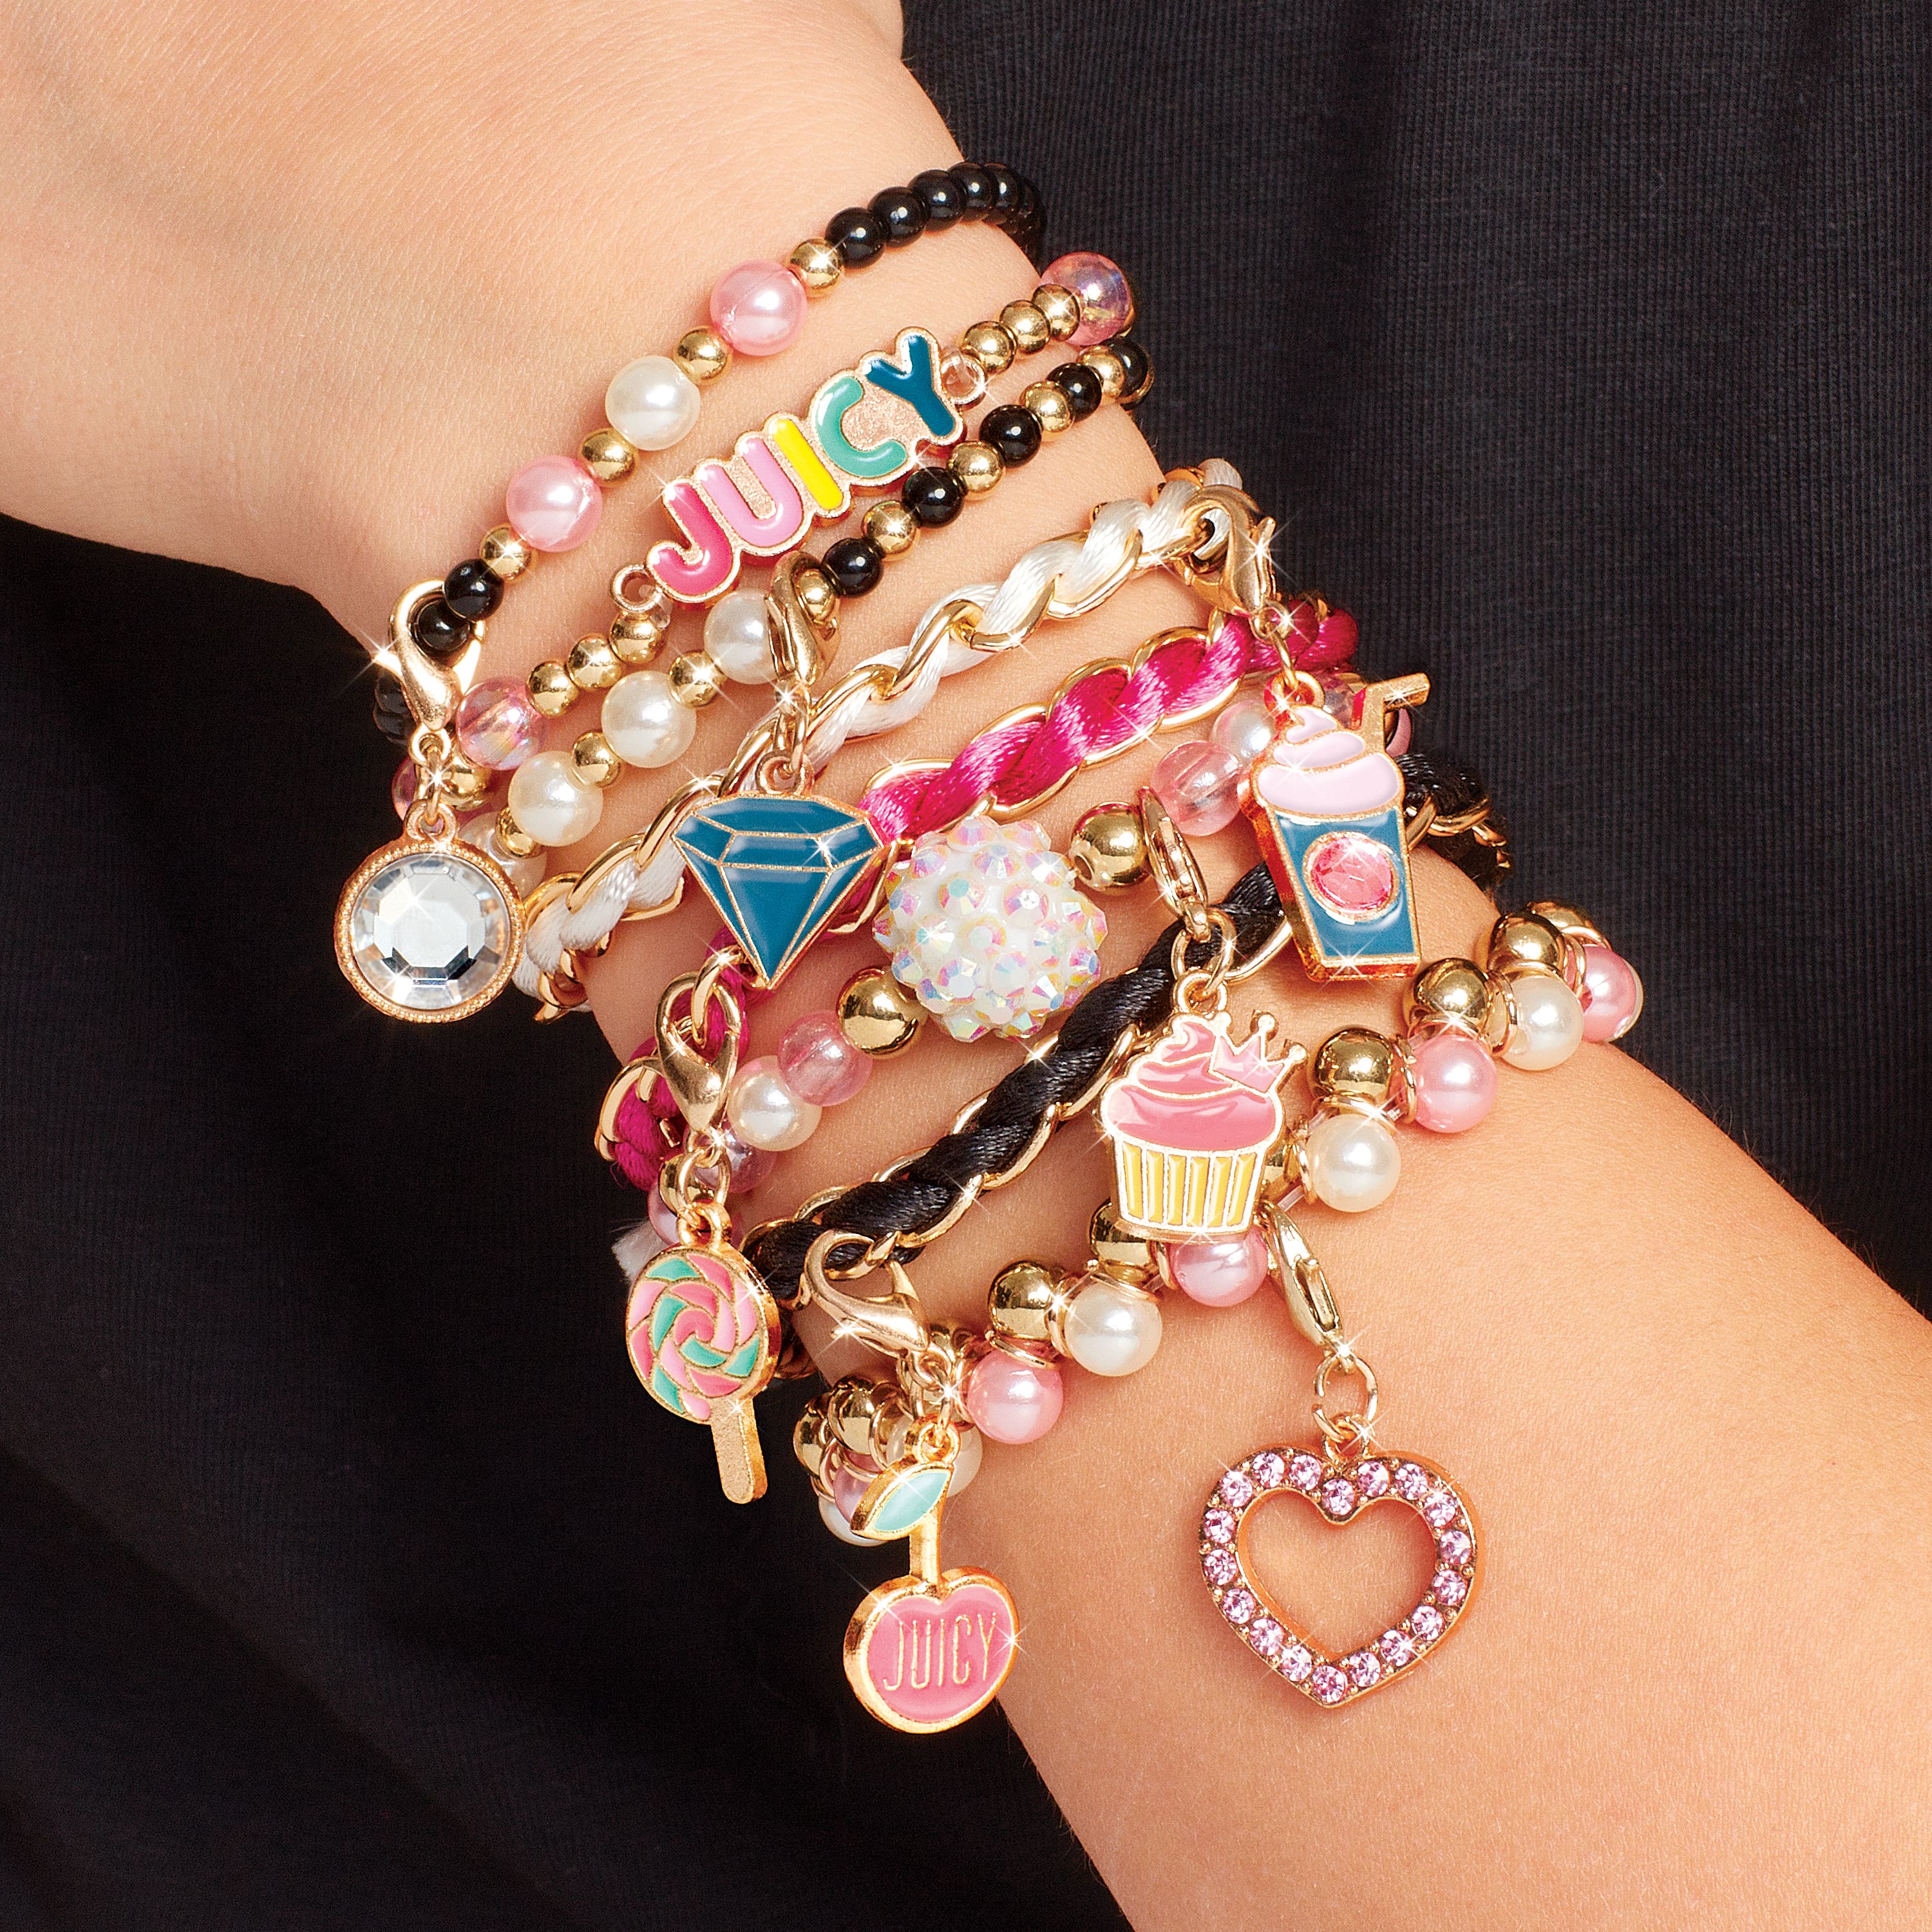 Juicy Couture DIY Chain and Charm Bracelet Kit - Brilliant Childrens  Presents